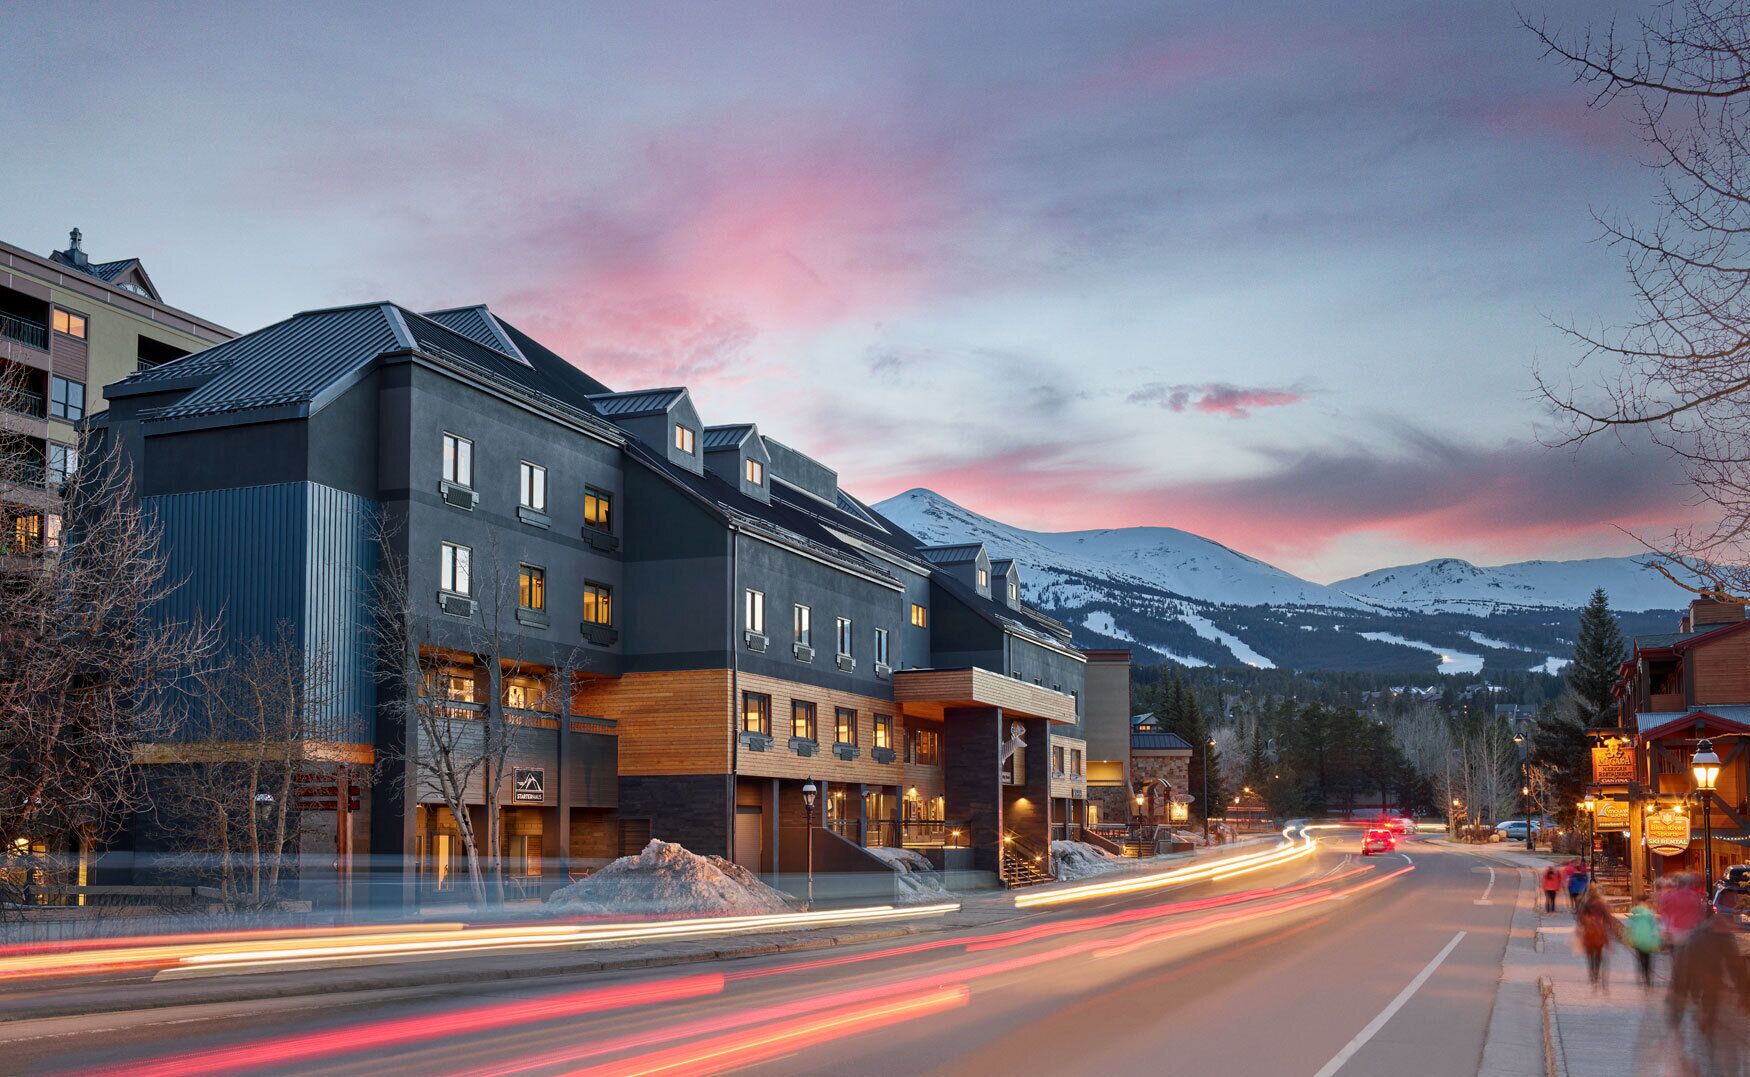 Experience Ultimate Comfort and Convenience at Gravity Haus Ski-in/Ski-out Hotel with a Restaurant in Breckenridge CO